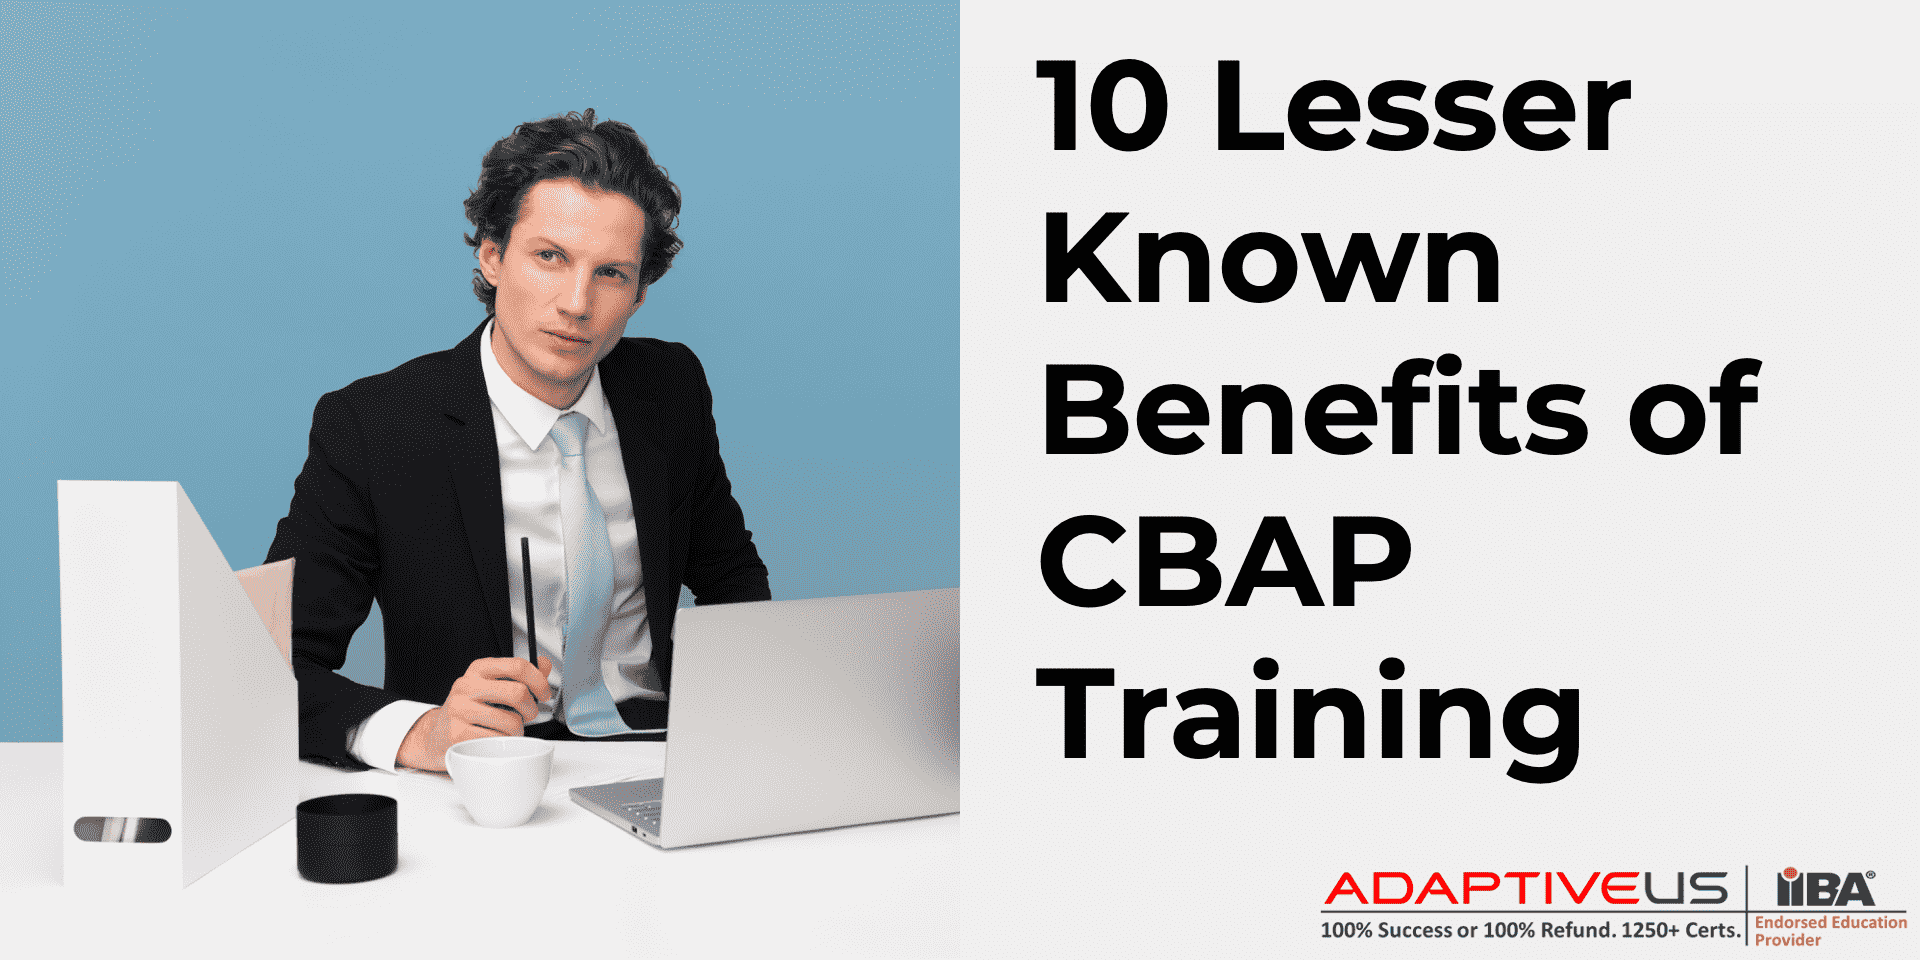 10 Lesser Known Benefits of CBAP Training